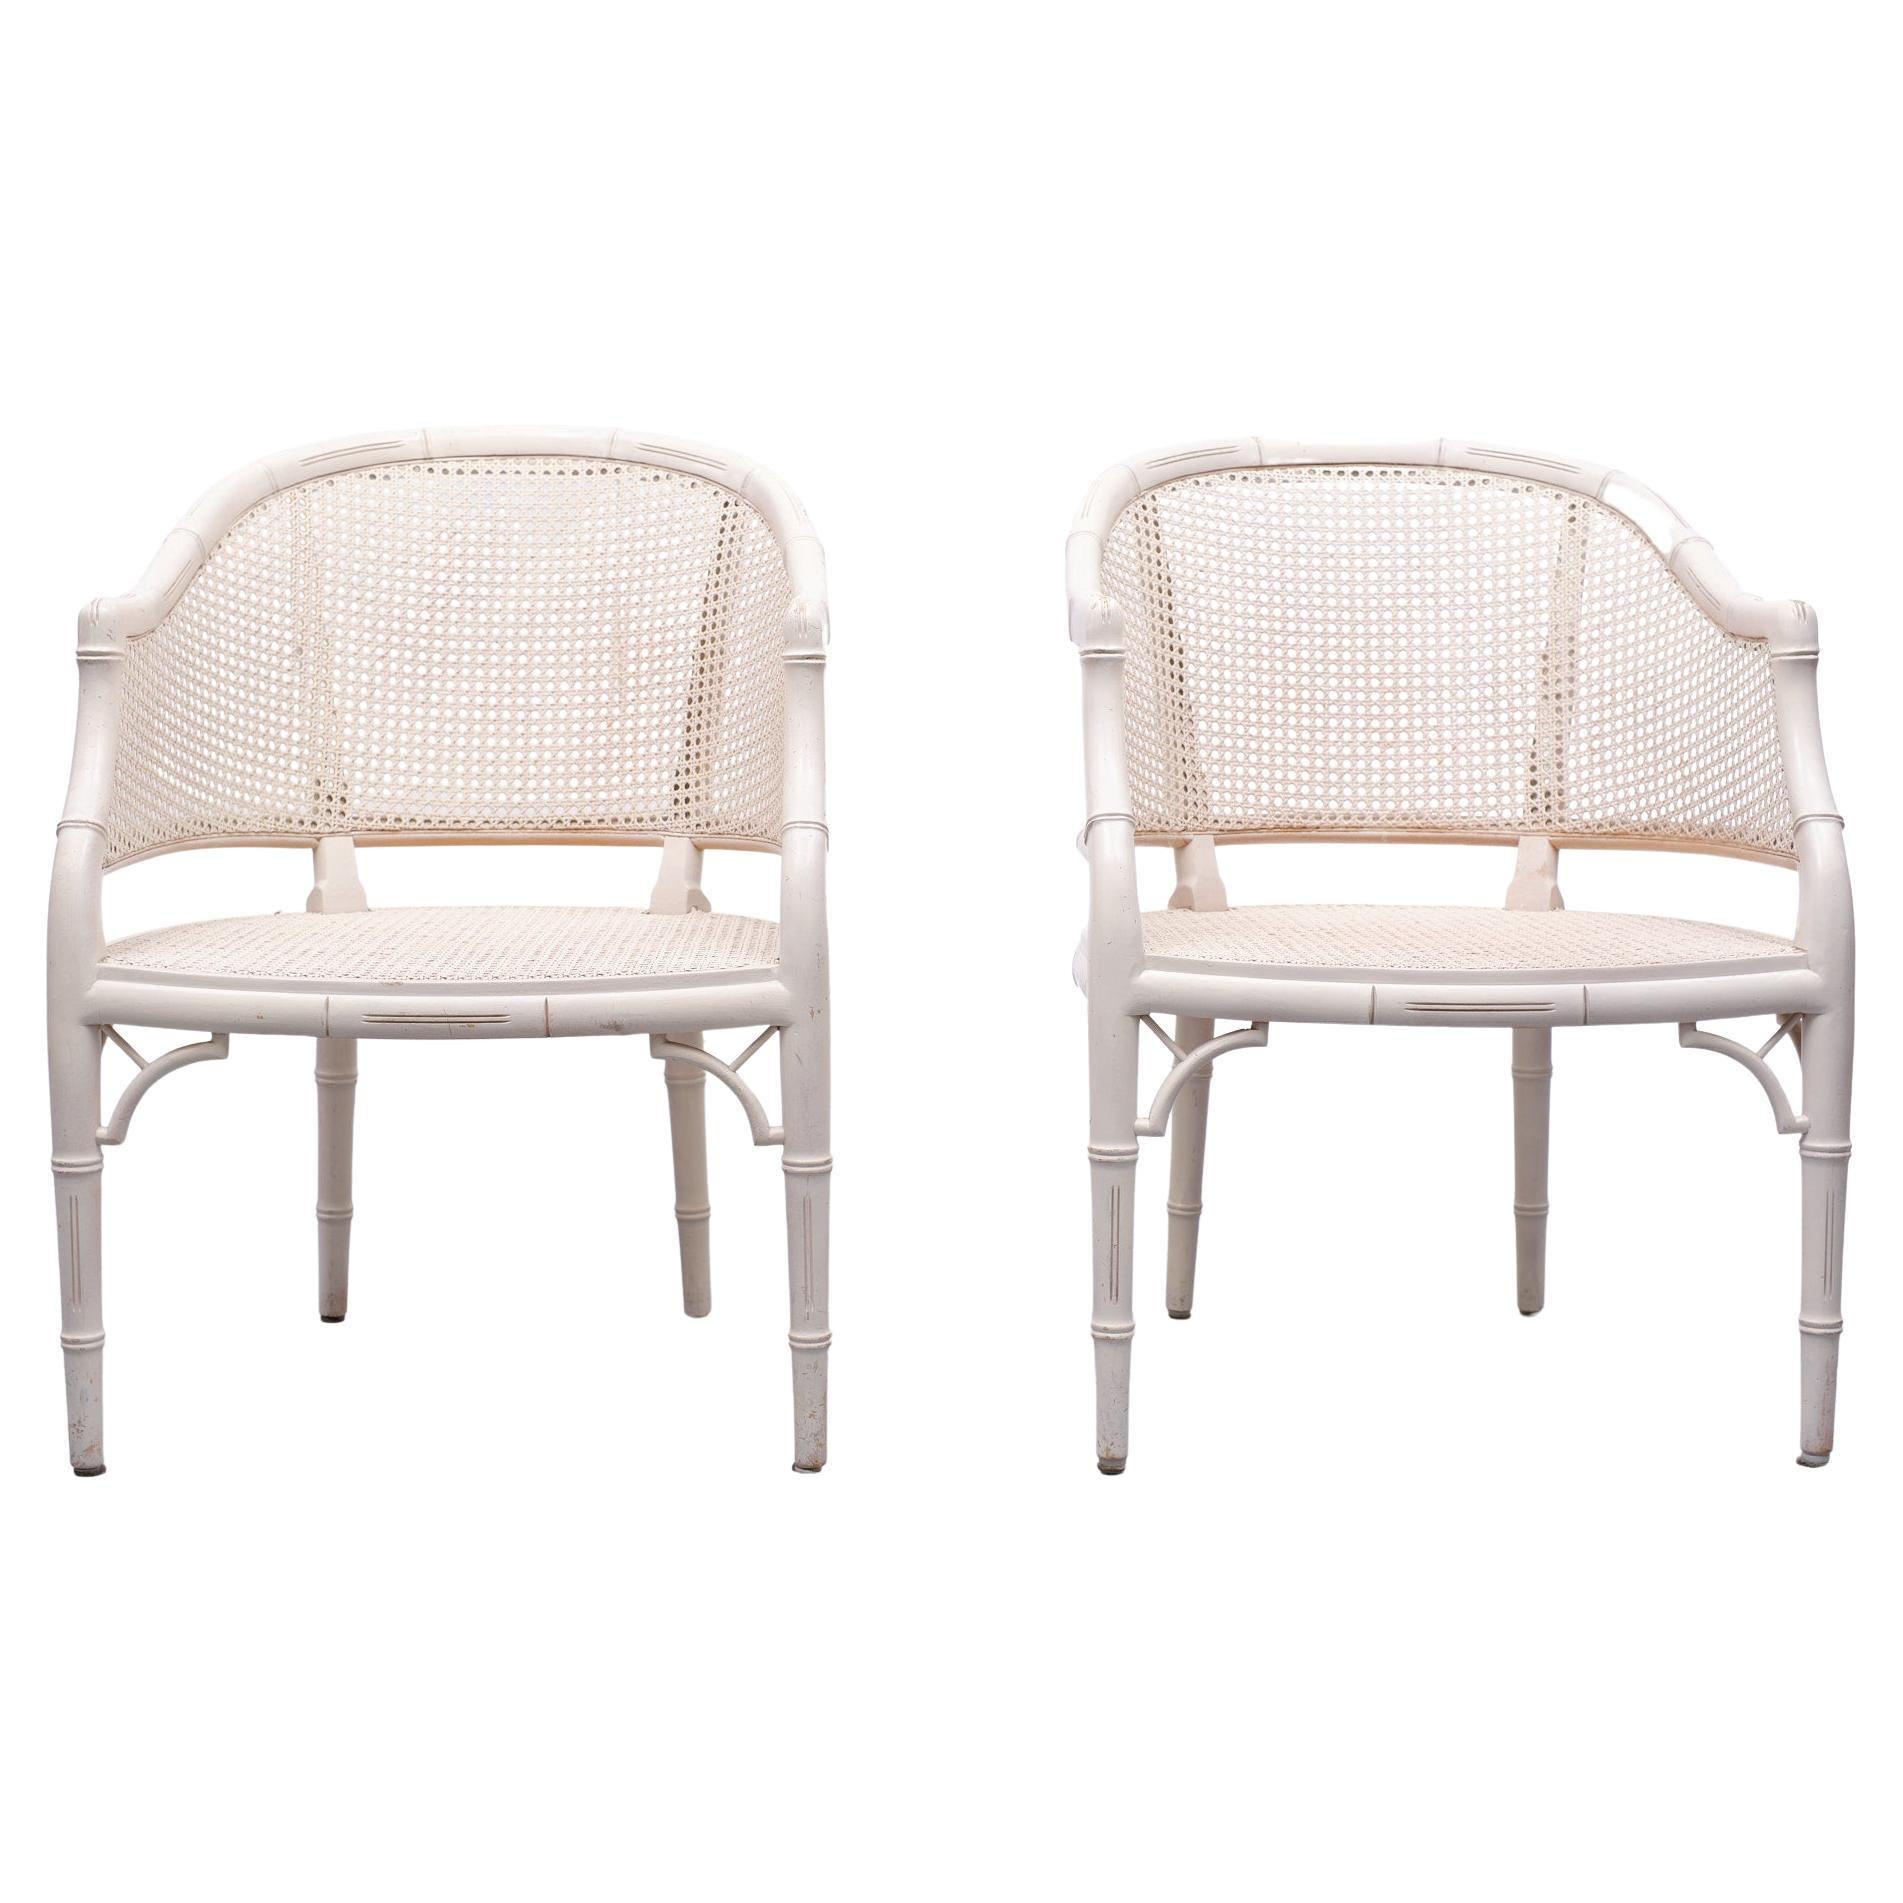 Very nice pair of Mid-Century Modern barrel chairs. Featuring a handcrafted faux-bamboo wooden frame with a caned back and sides. Made in the Hollywood Regency style with a loose seat cushion. In a off white color.